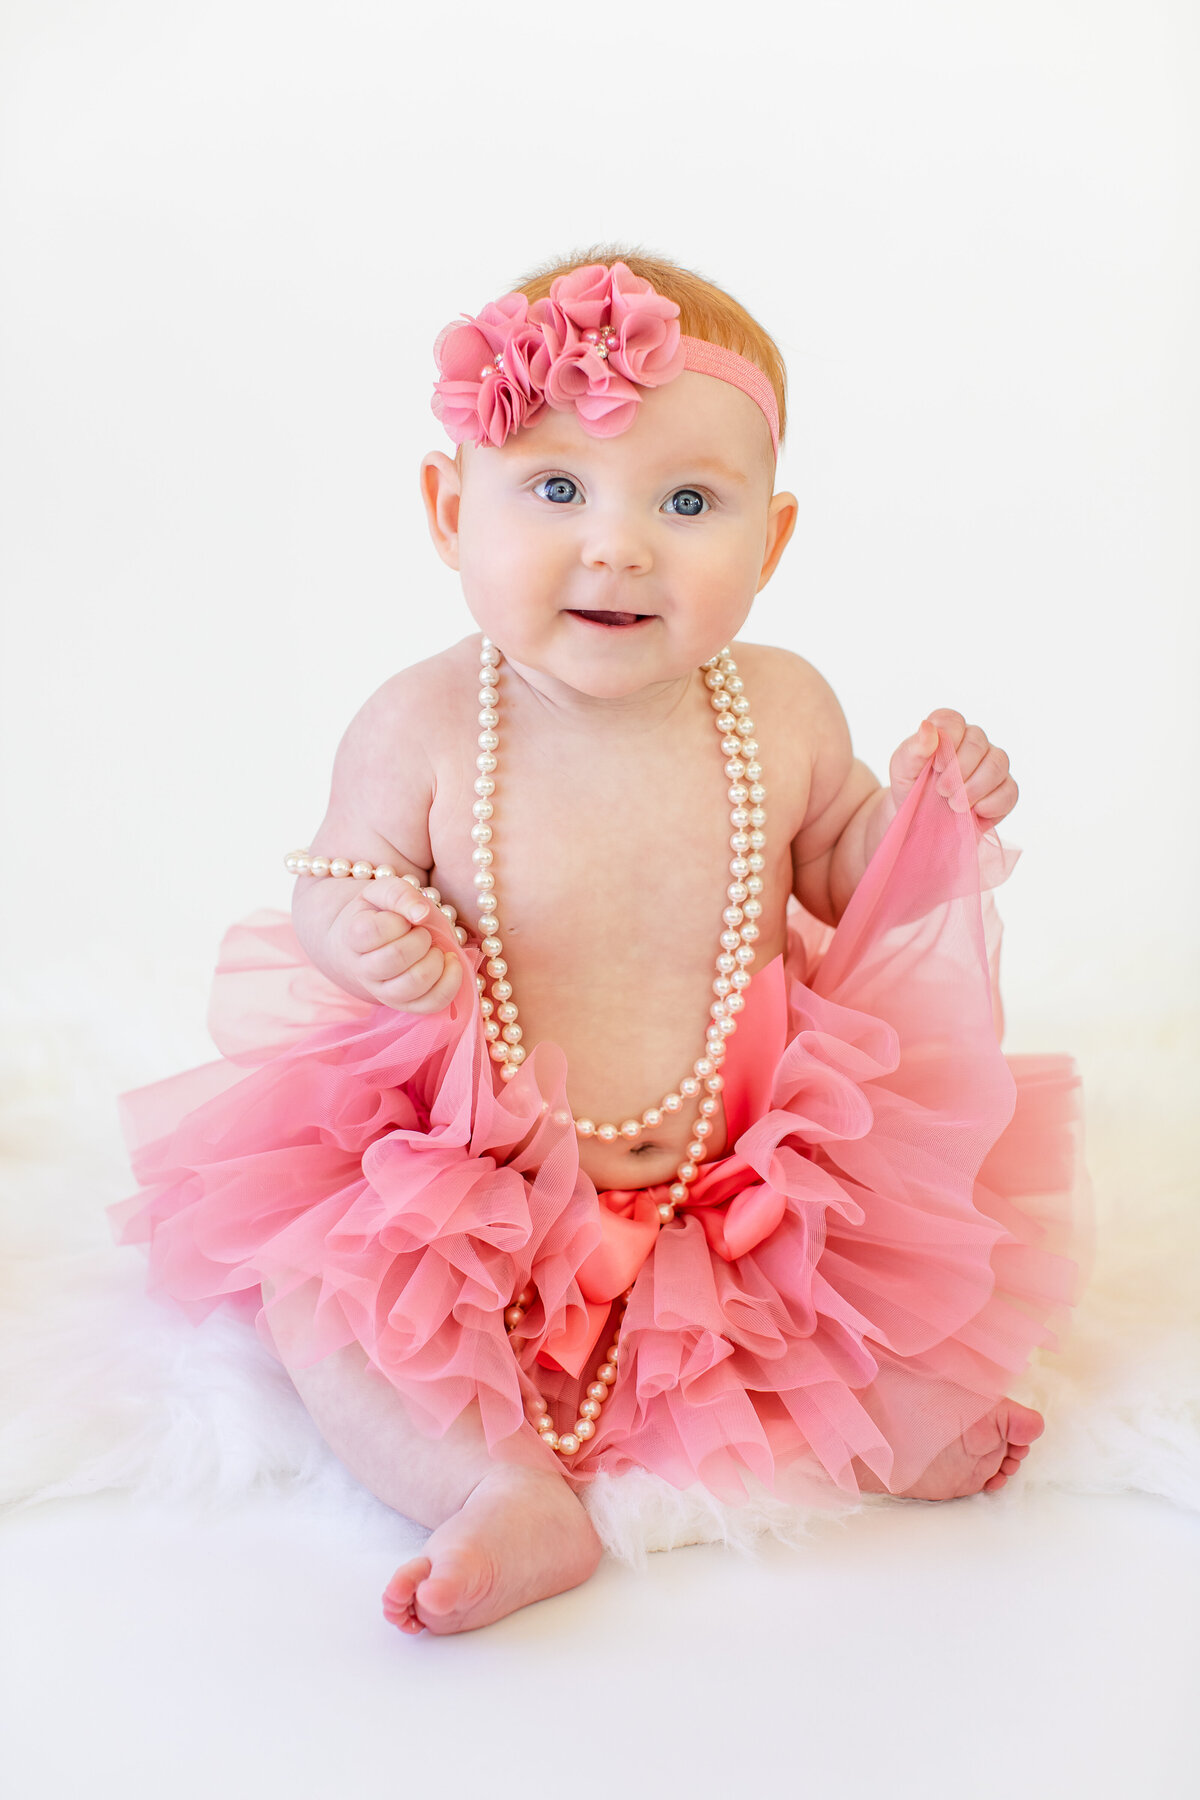 Baby girl in pink tutu and pearls smiling at camera